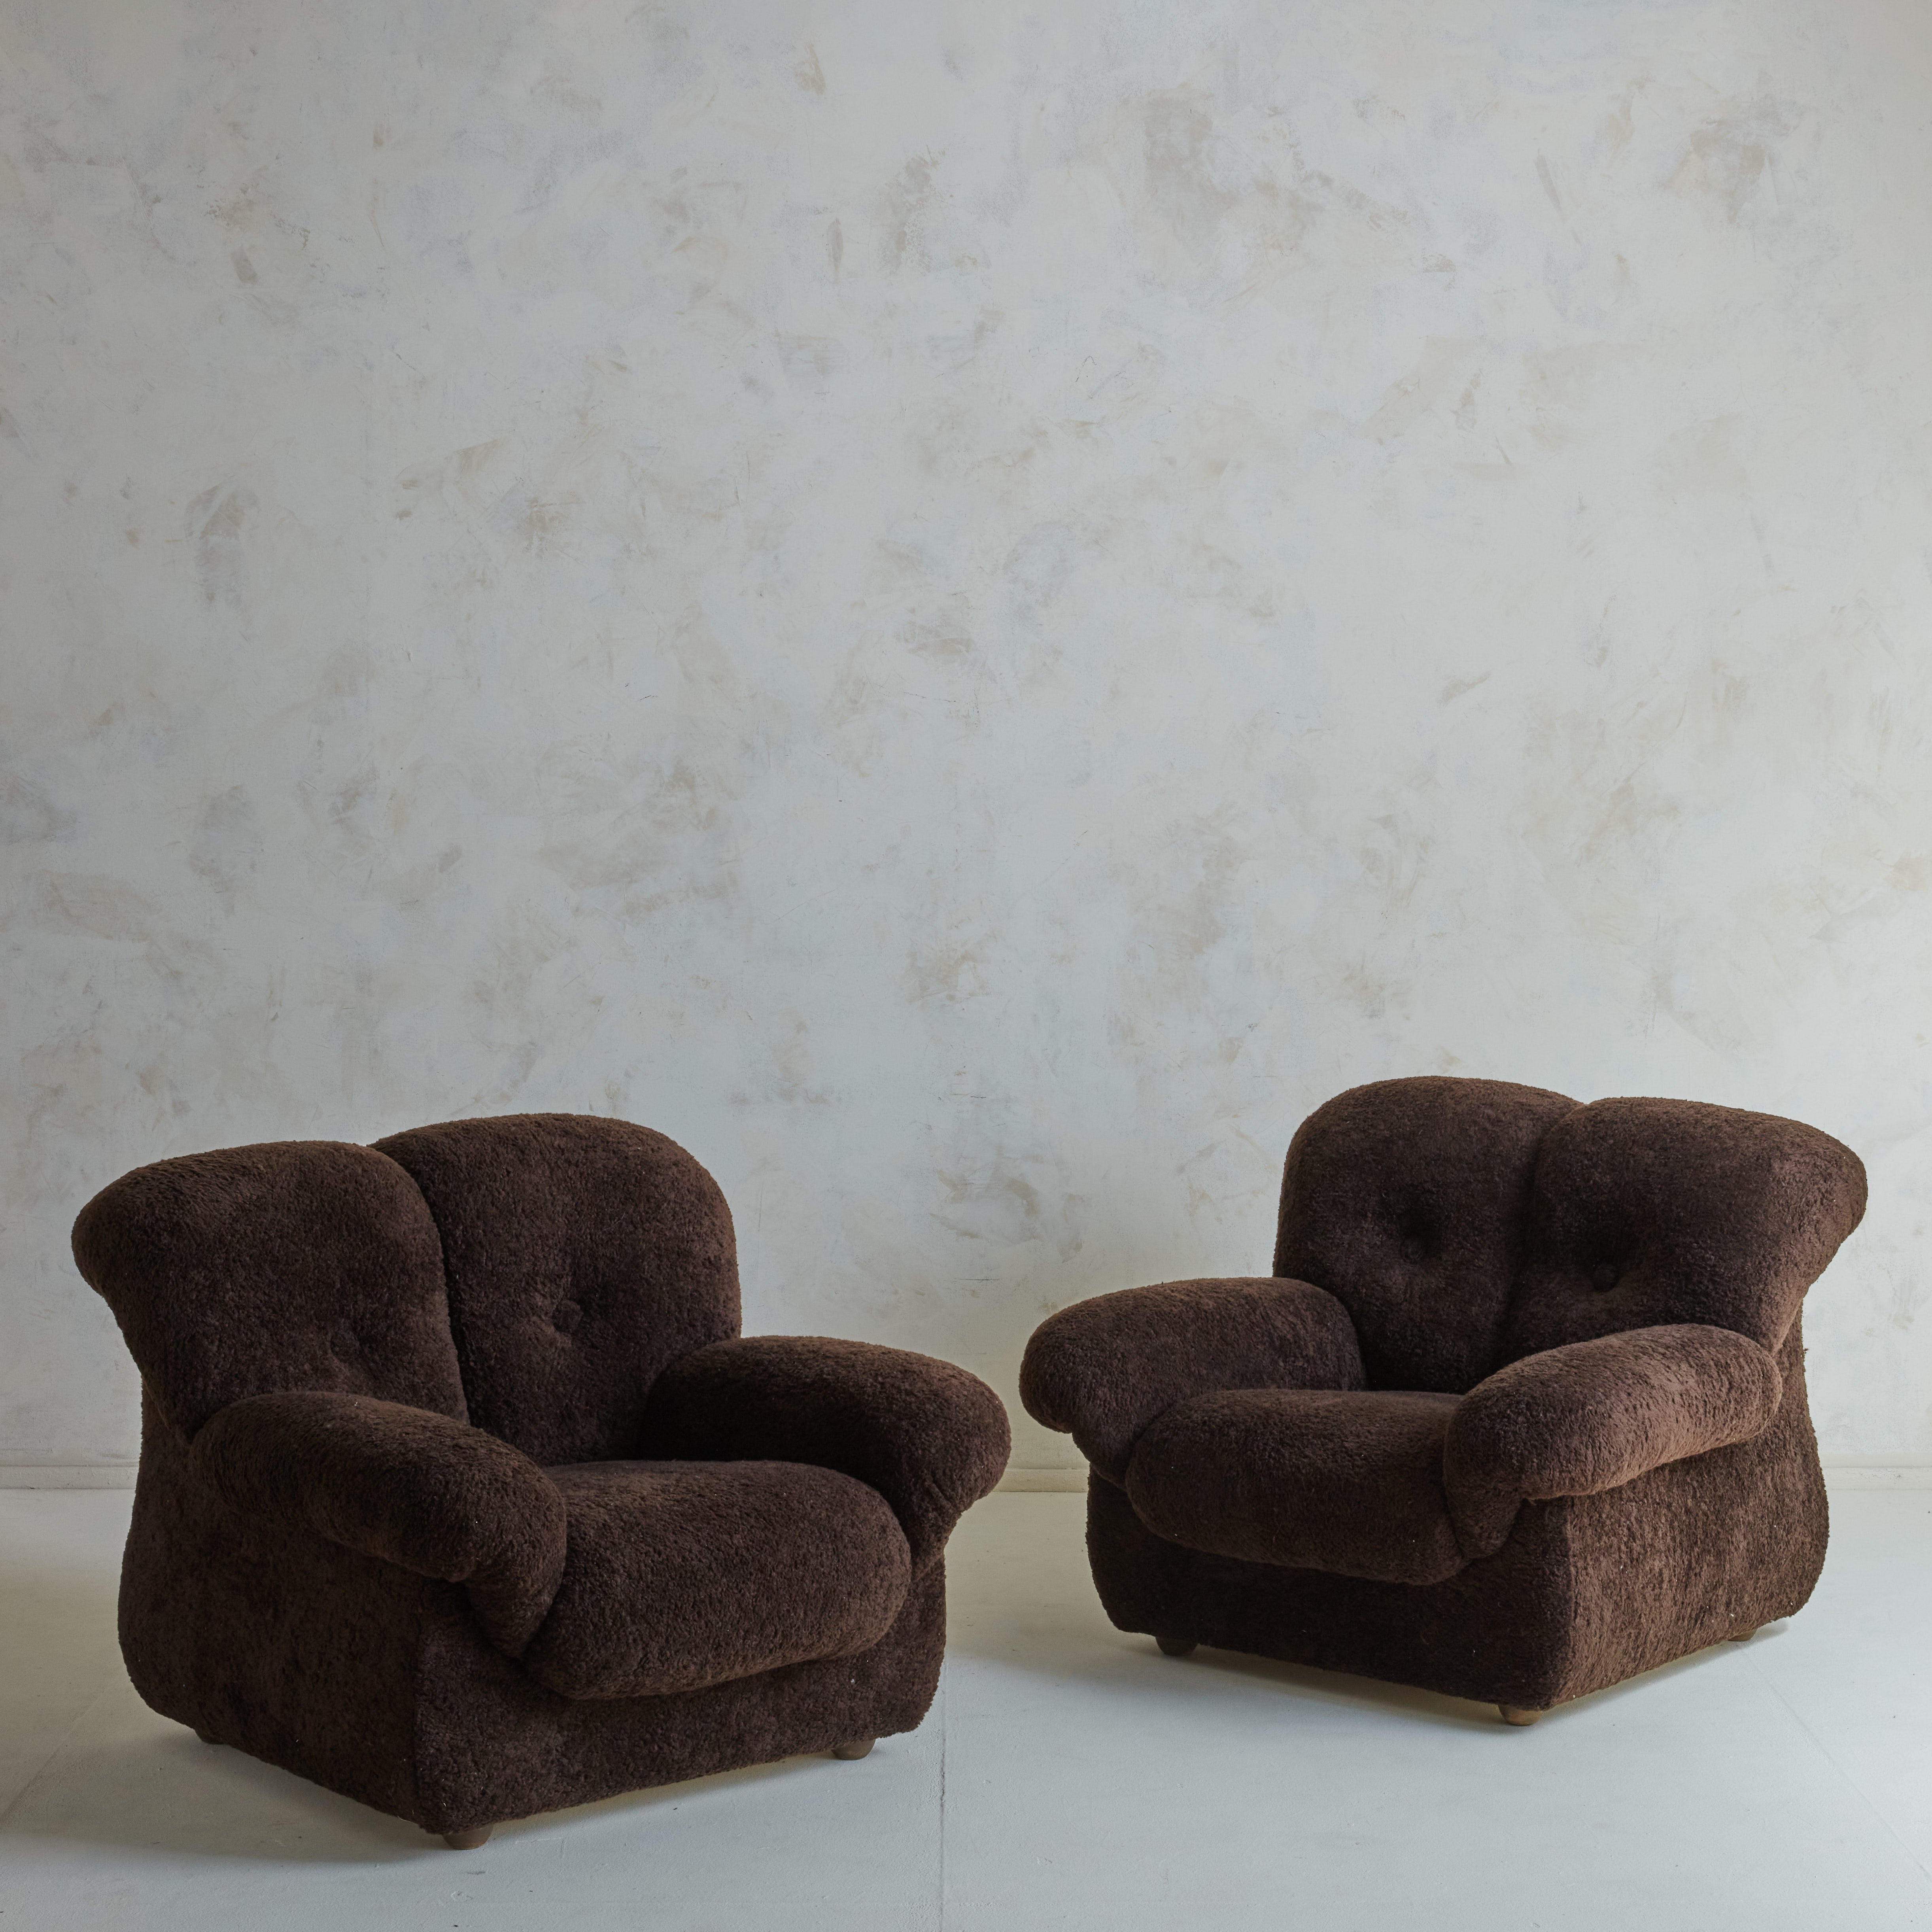 Large, oversized Italian lounge chair in brown teddy fabric with button tufts. The classic arm design of a traditional English sofa is adapted in these English rolled armchairs. The chair's wingback, which nearly seems to embrace the user, is